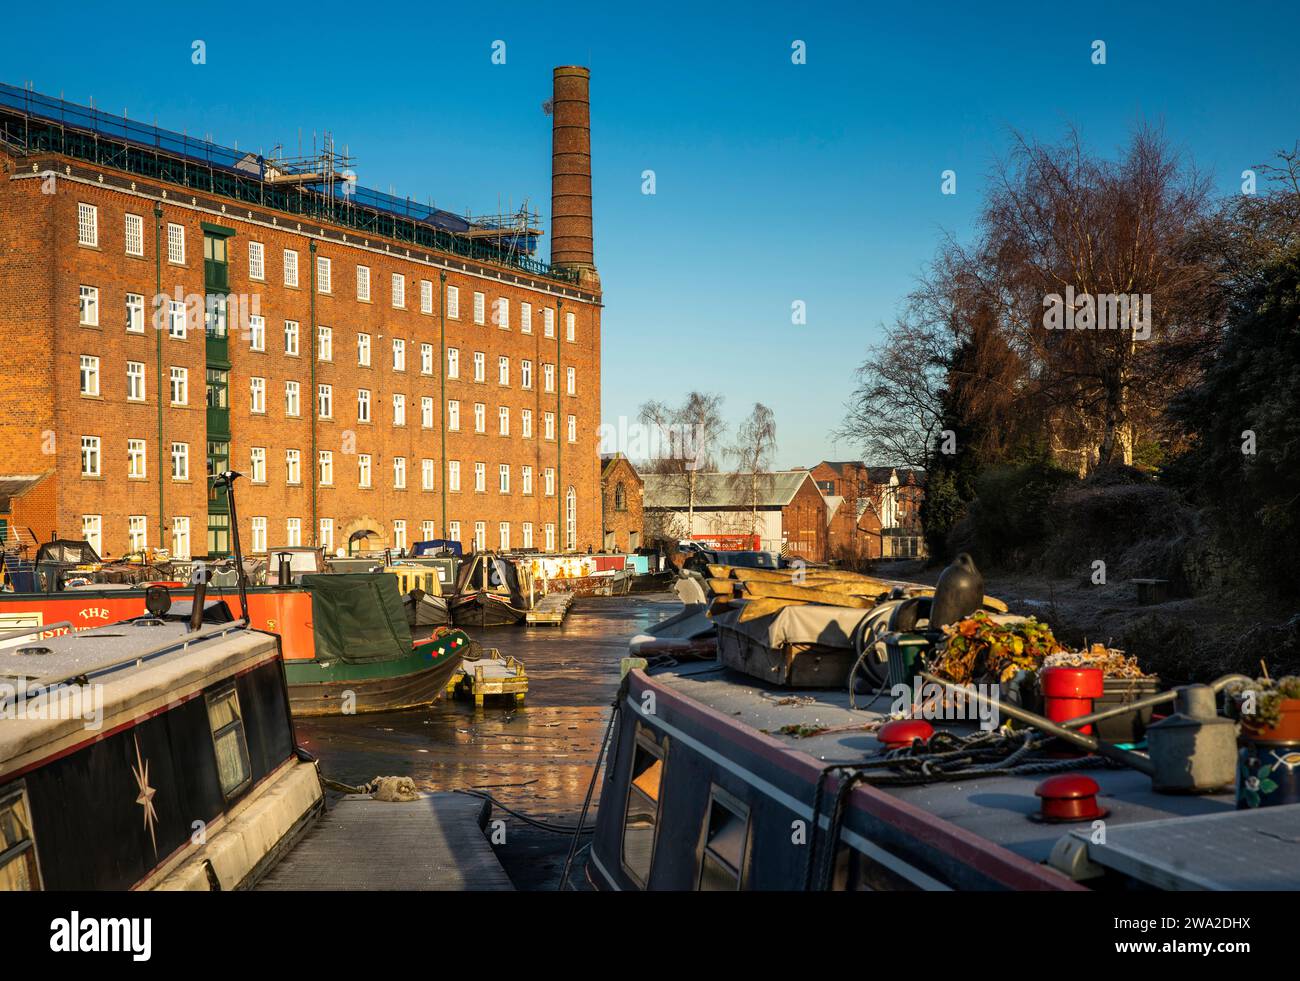 UK, England, Cheshire, Macclesfield, winter, frozen narrowboats on Macclesfield Canal at old Hovis Mill Stock Photo